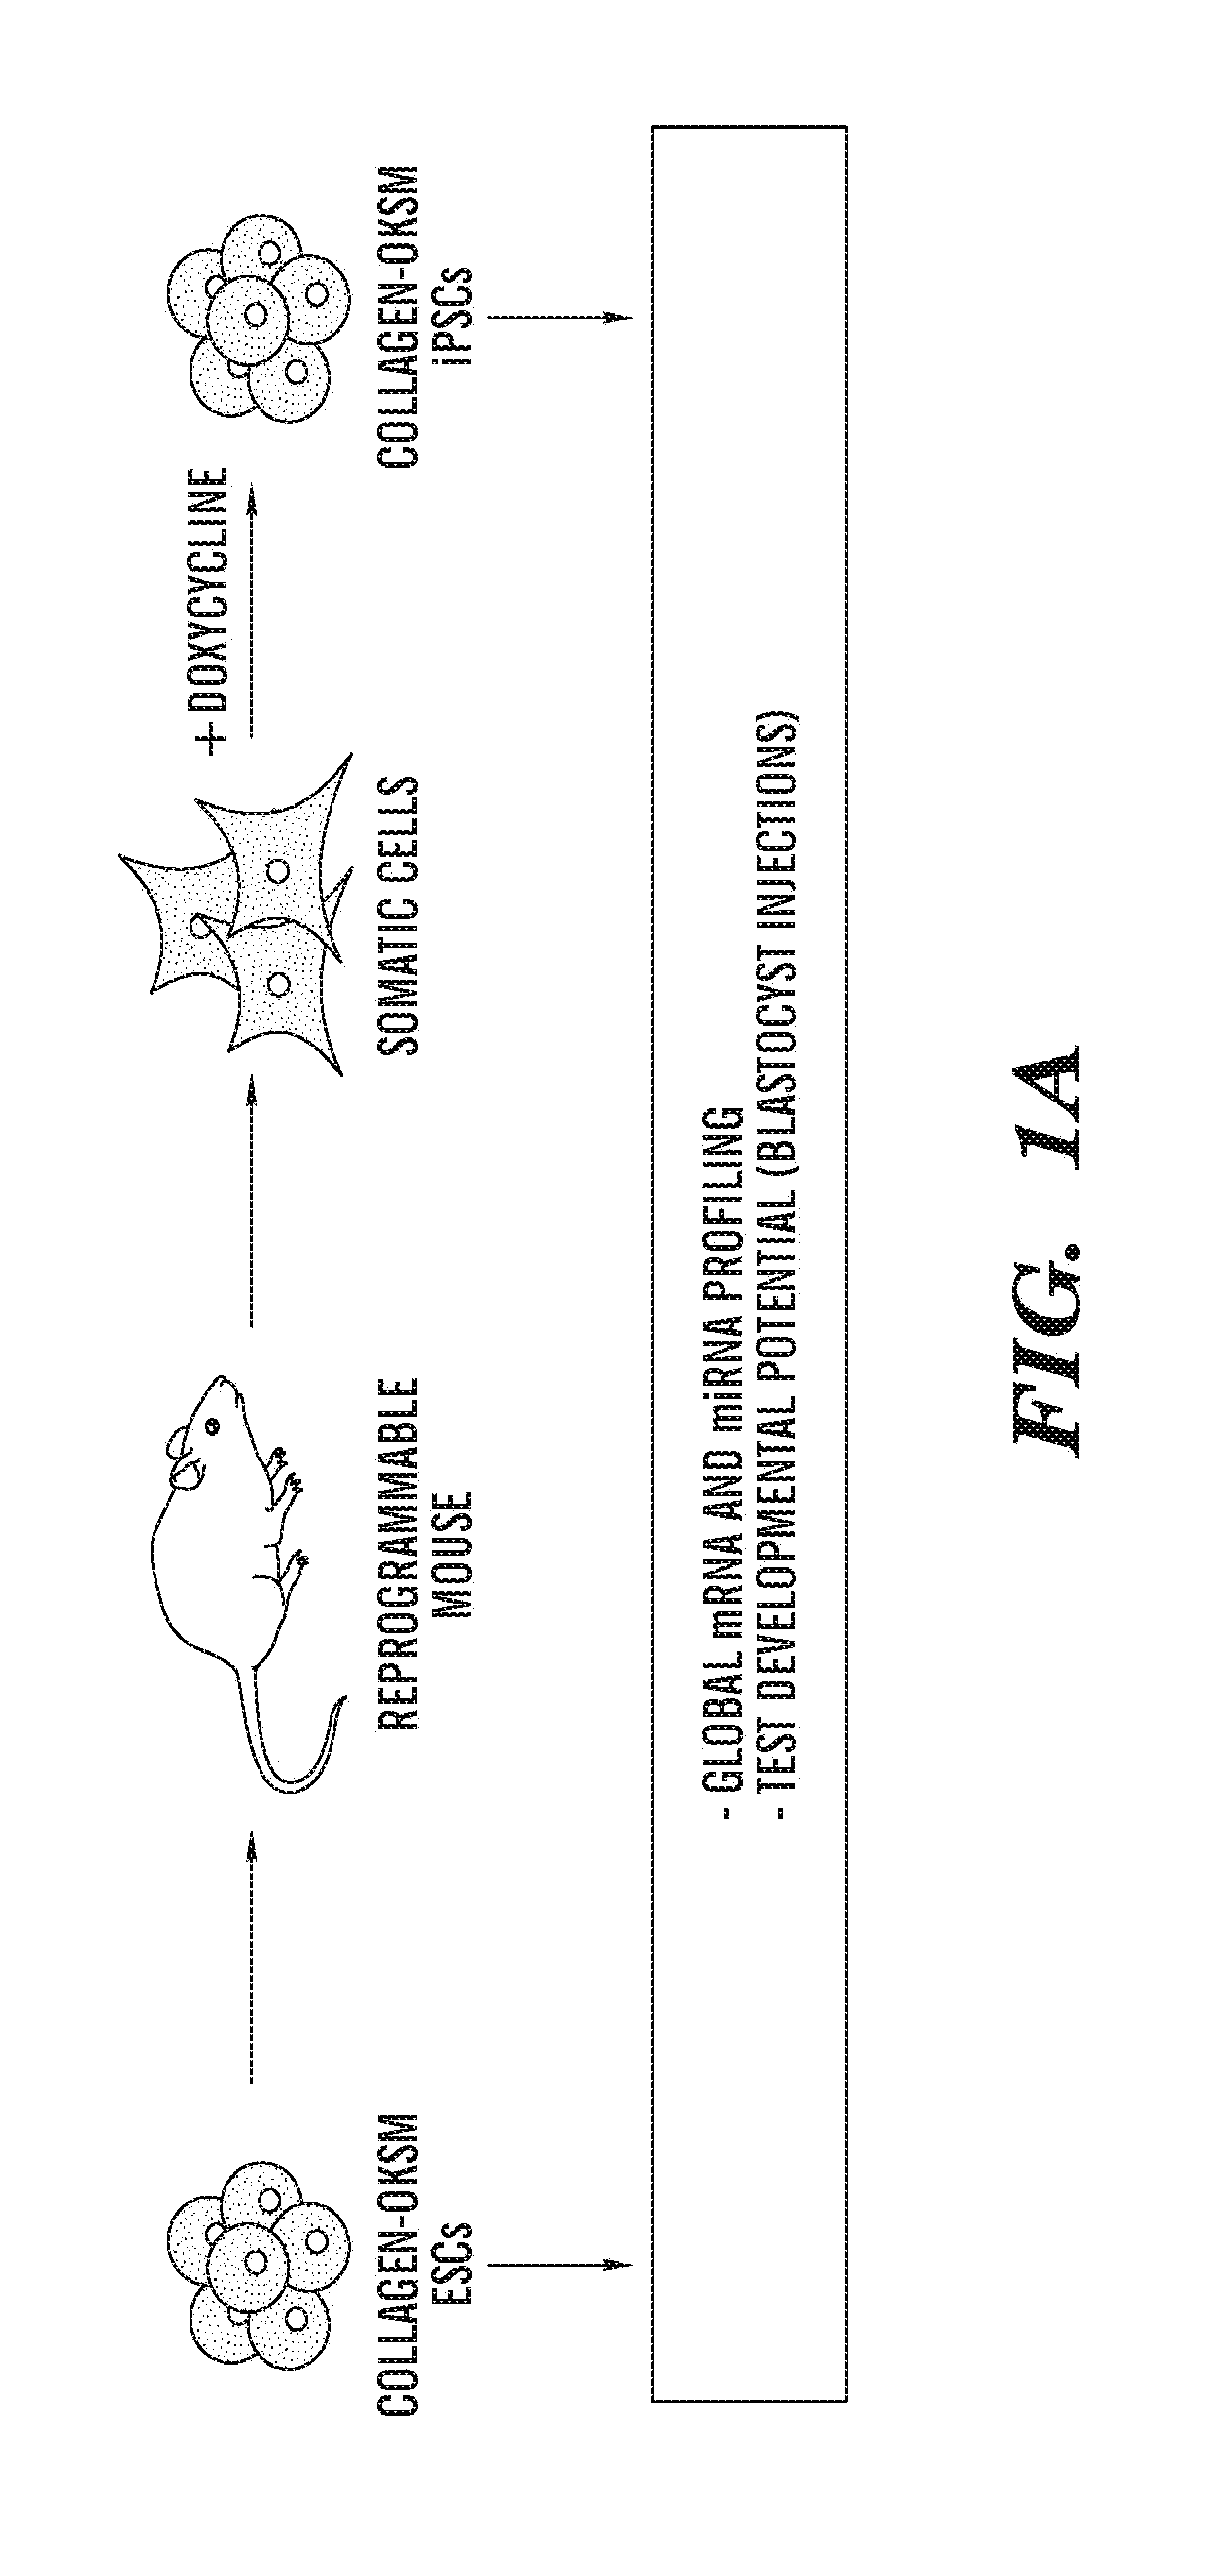 Method for selecting an ips cell